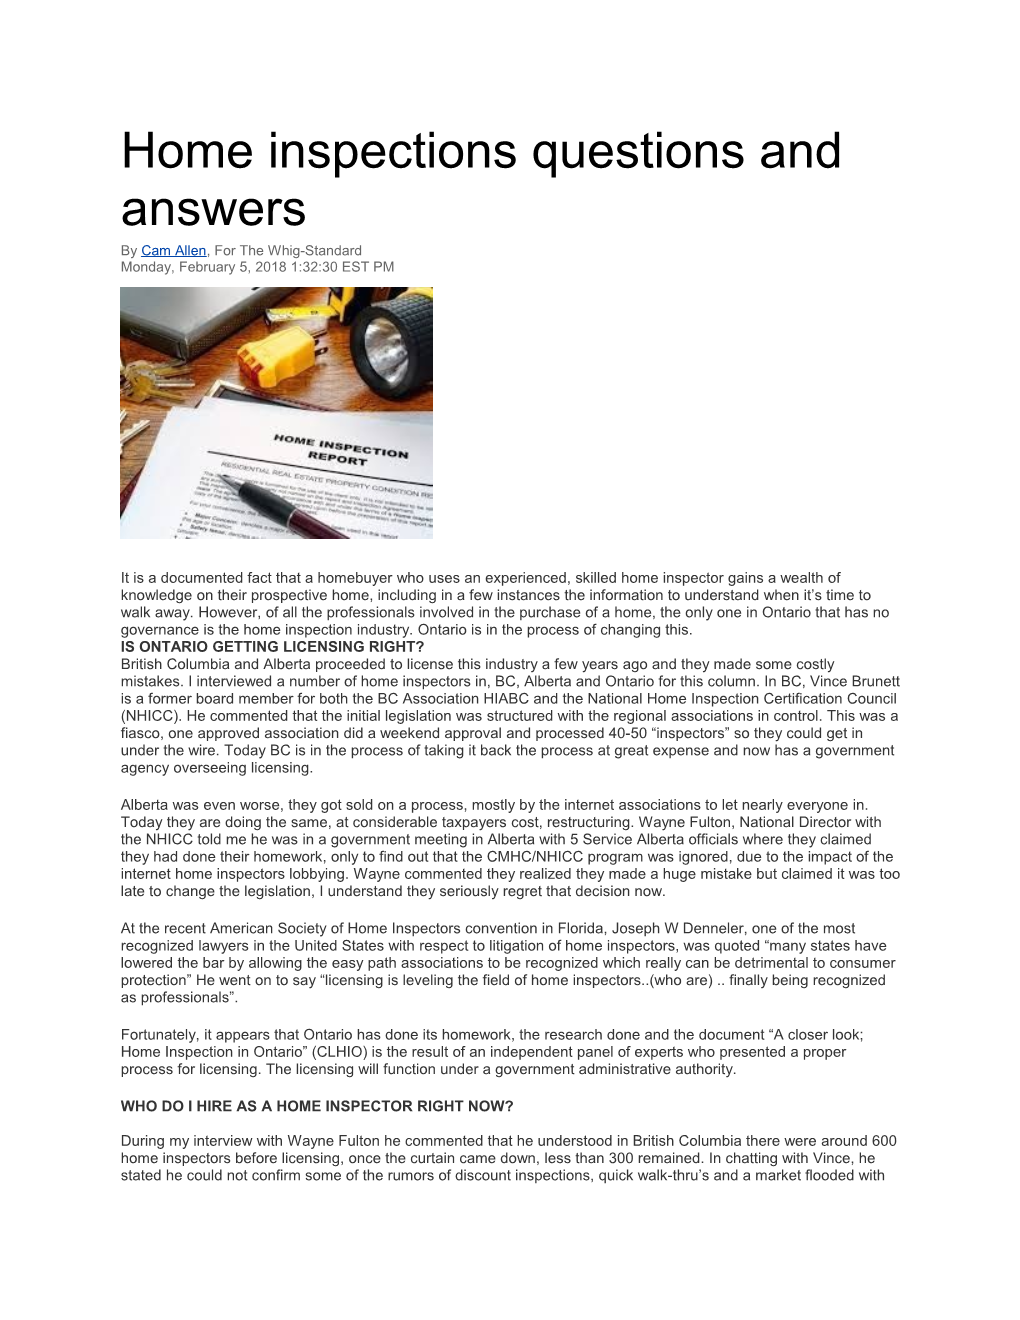 Home Inspections Questions and Answers